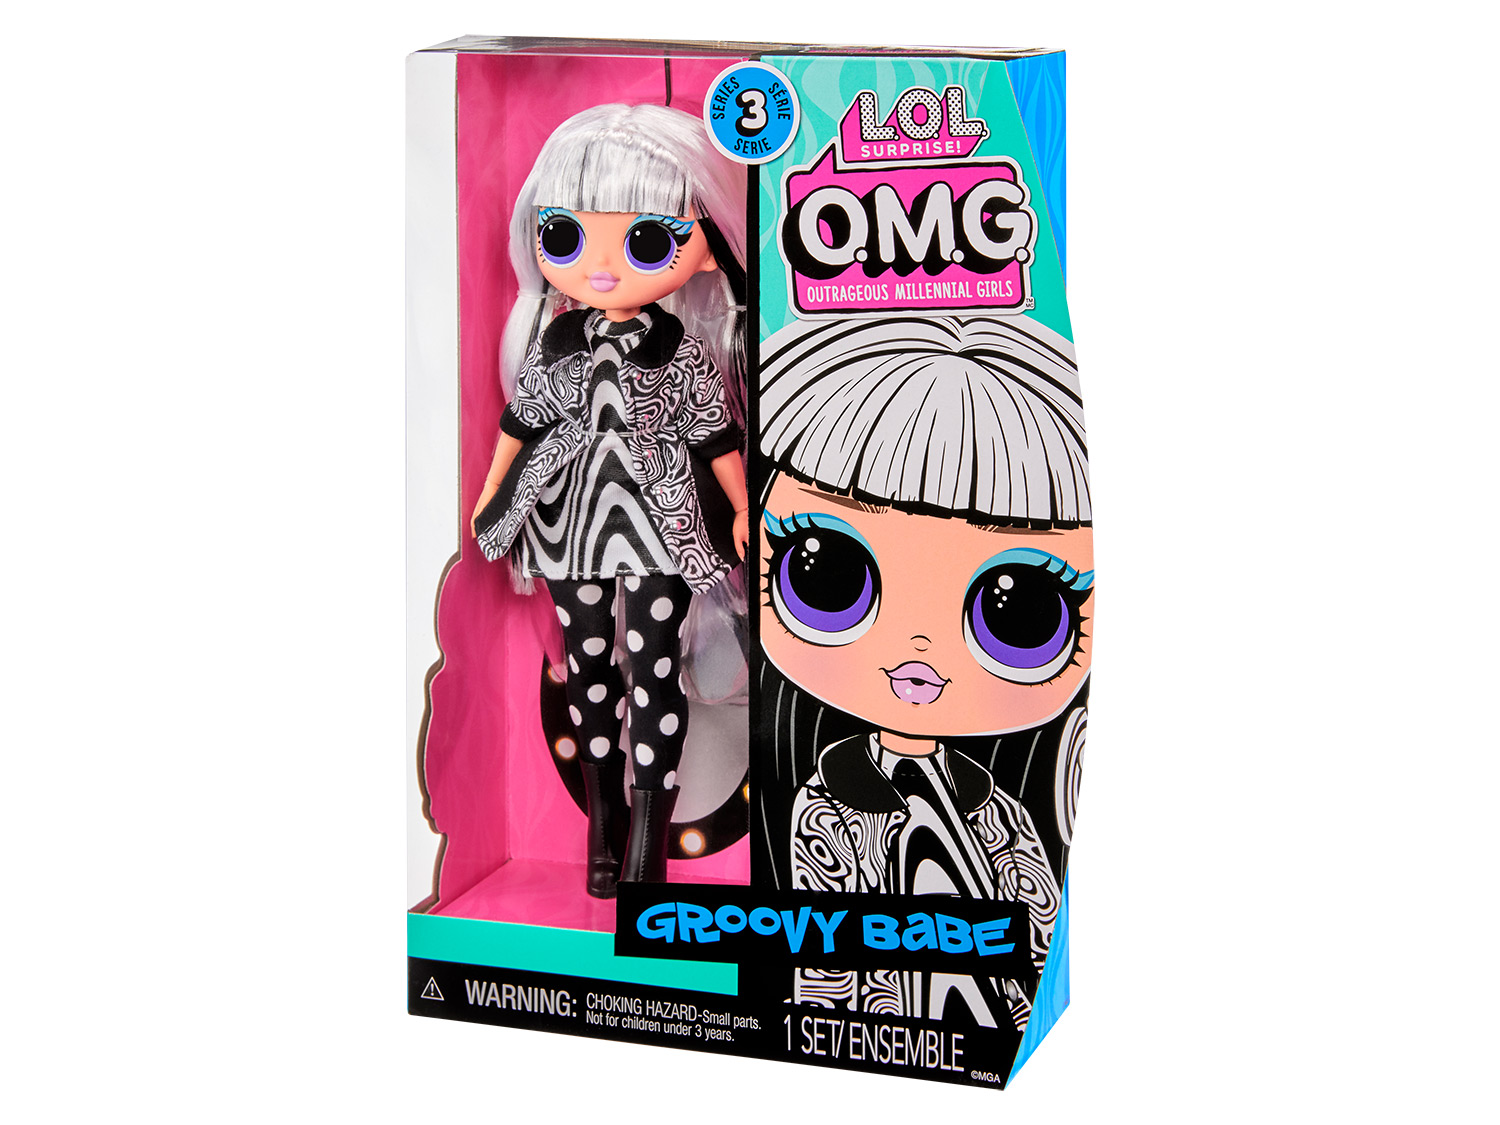 OMG Core Doll (Groovy Babe)